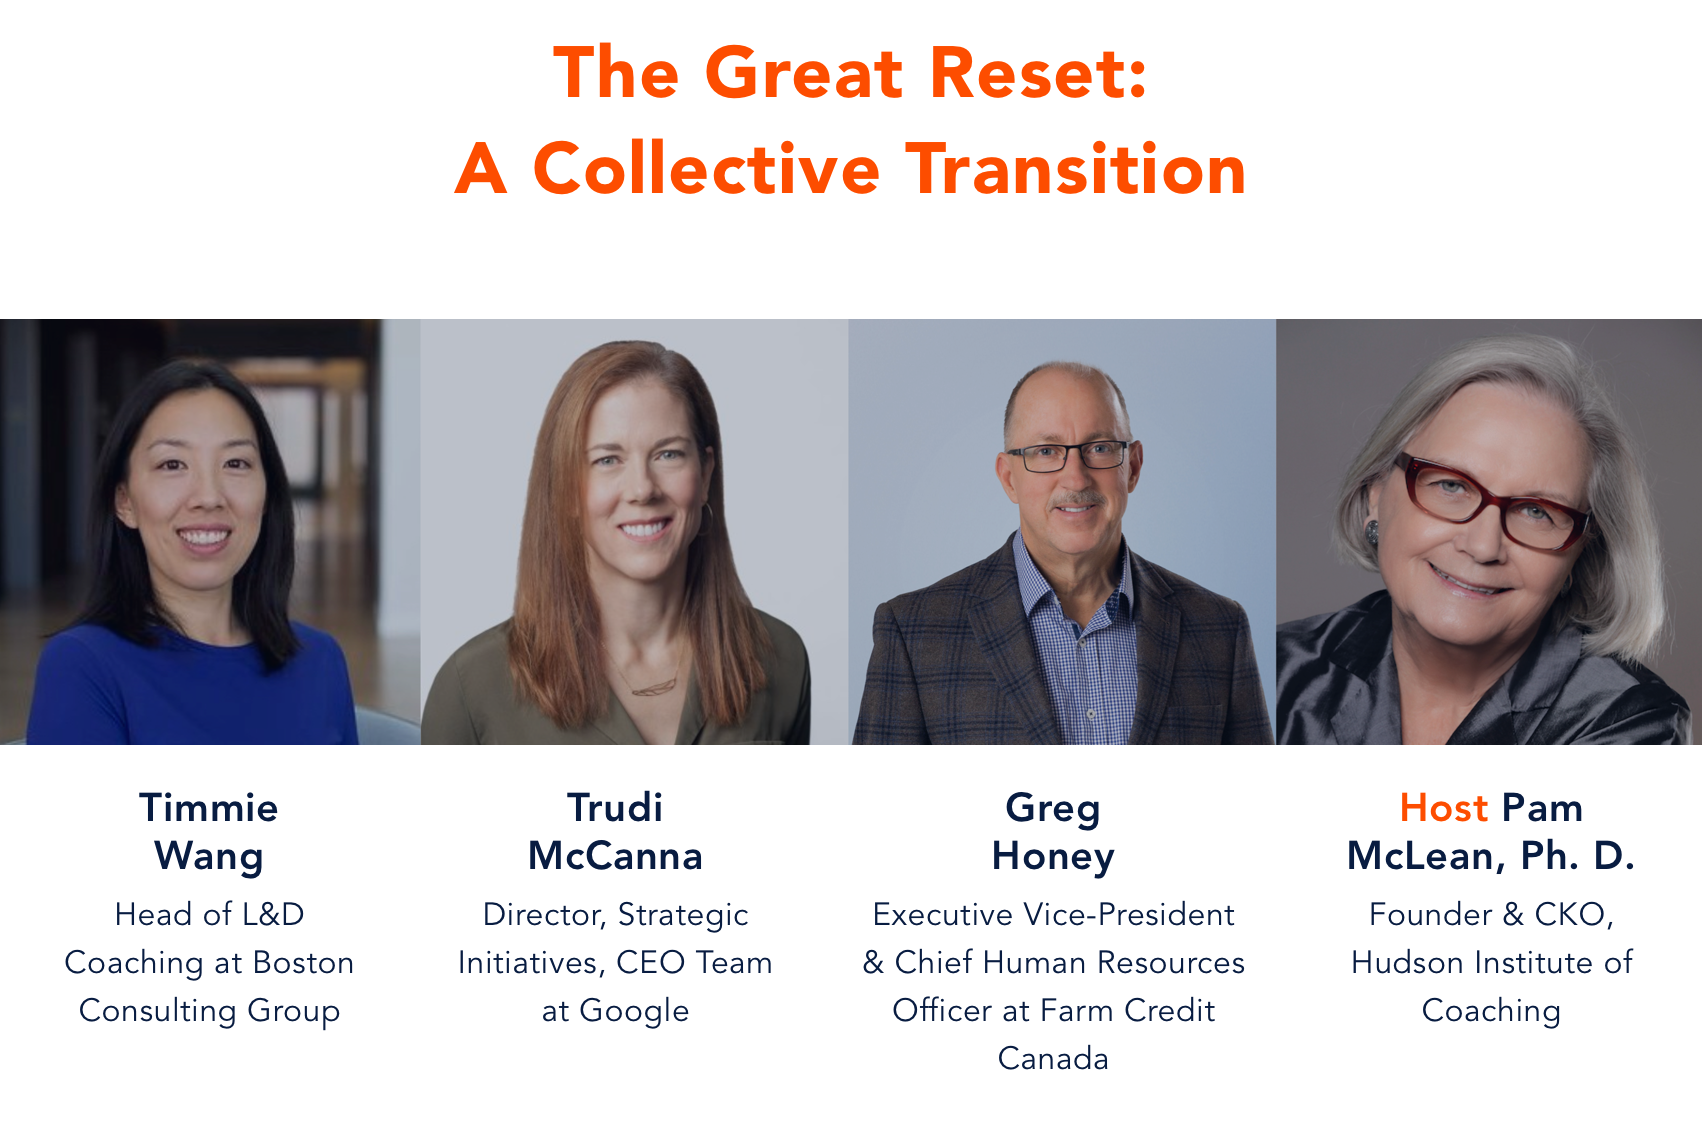 [Video] Hudson Coaching Conversations: The Great Reset - A Collective Transition